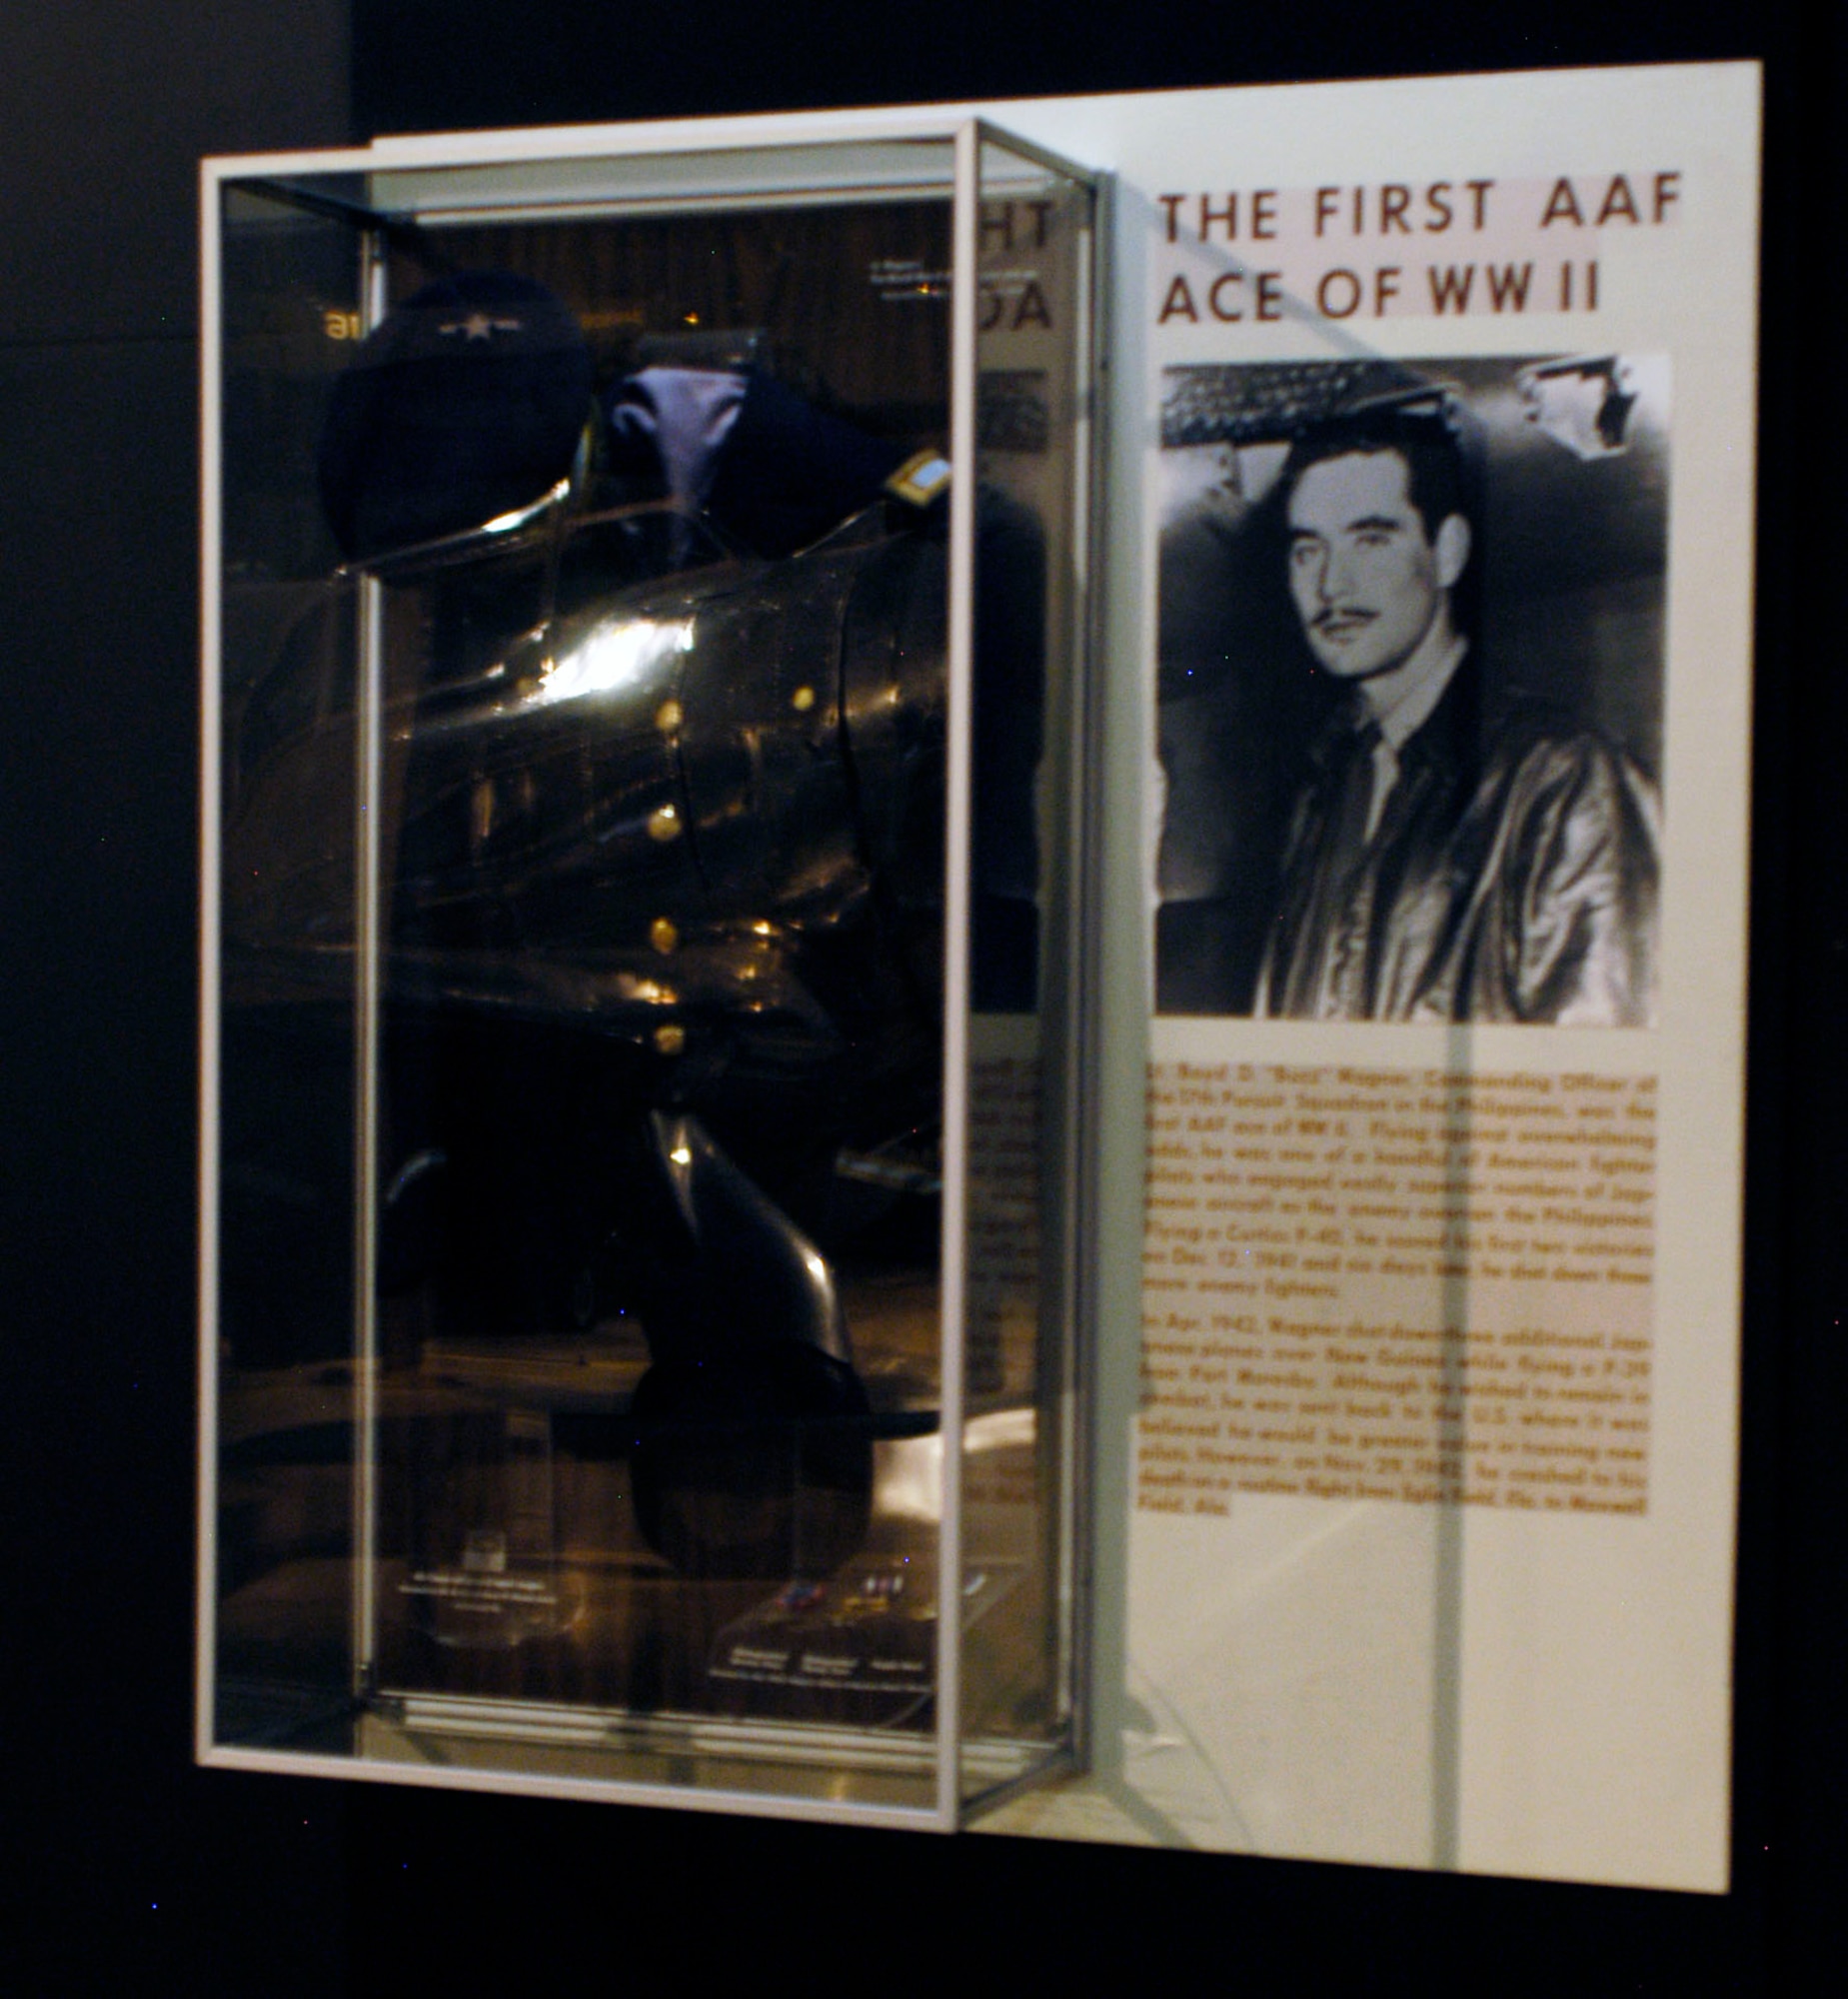 DAYTON, Ohio -- Lt. Boyd D. "Buzz" Wagner exhibit in the World War II Gallery at the National Museum of the U.S. Air Force. The exhibit includes Lt. Wagner's pre-WWII dress blouse and cap, which were donated by Maj. J. Ward Boyce. (U.S. Air Force photo)